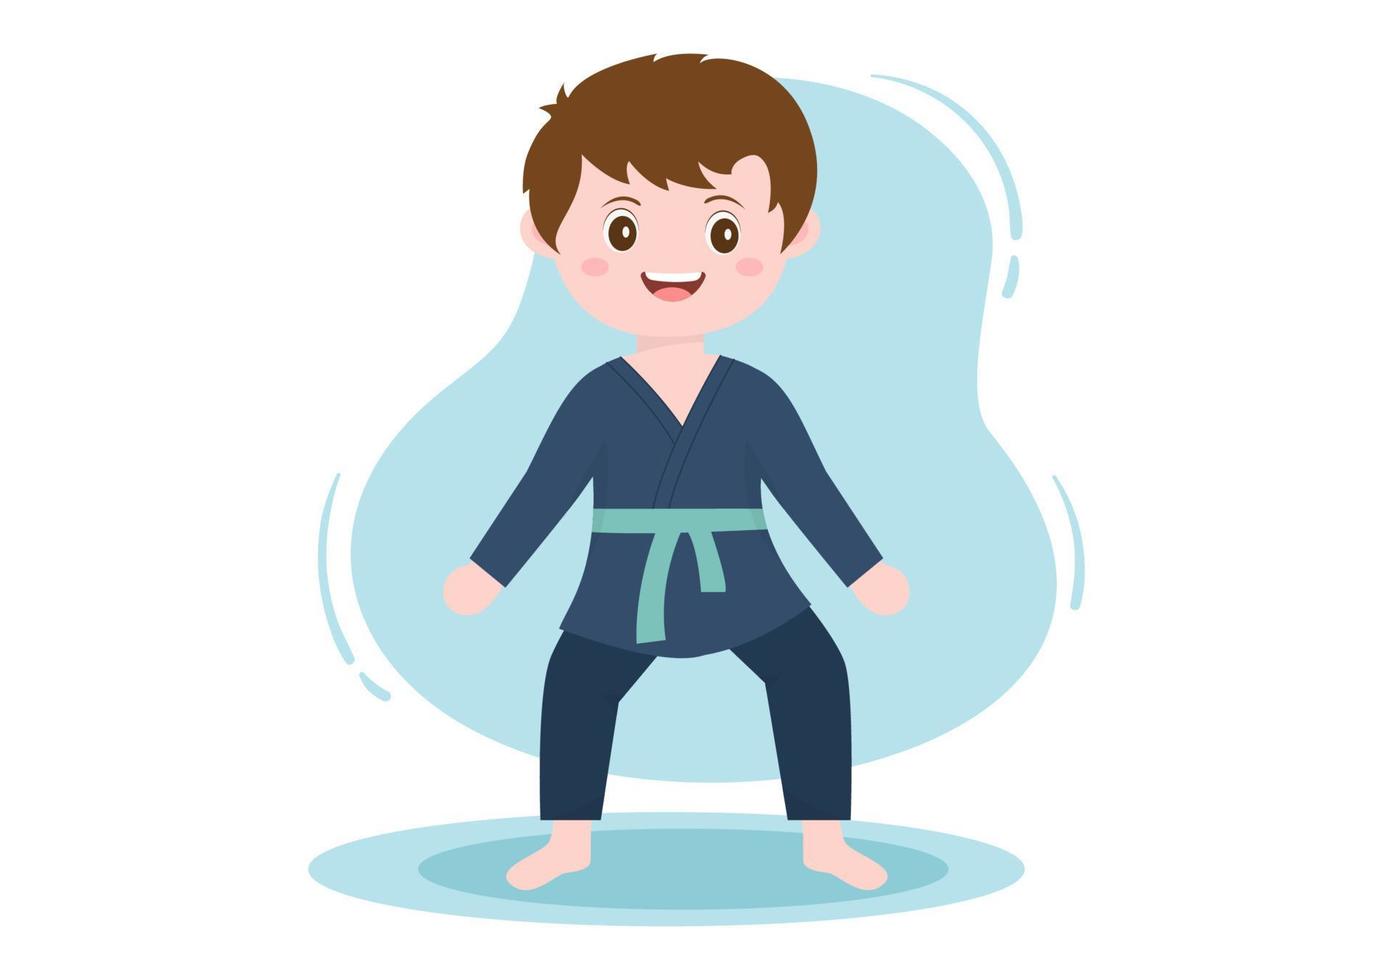 Cute Cartoon Kids Doing Some Basic Karate Martial Arts Moves, fighting Pose and Wearing Kimono in Flat Style Background Vector Illustration